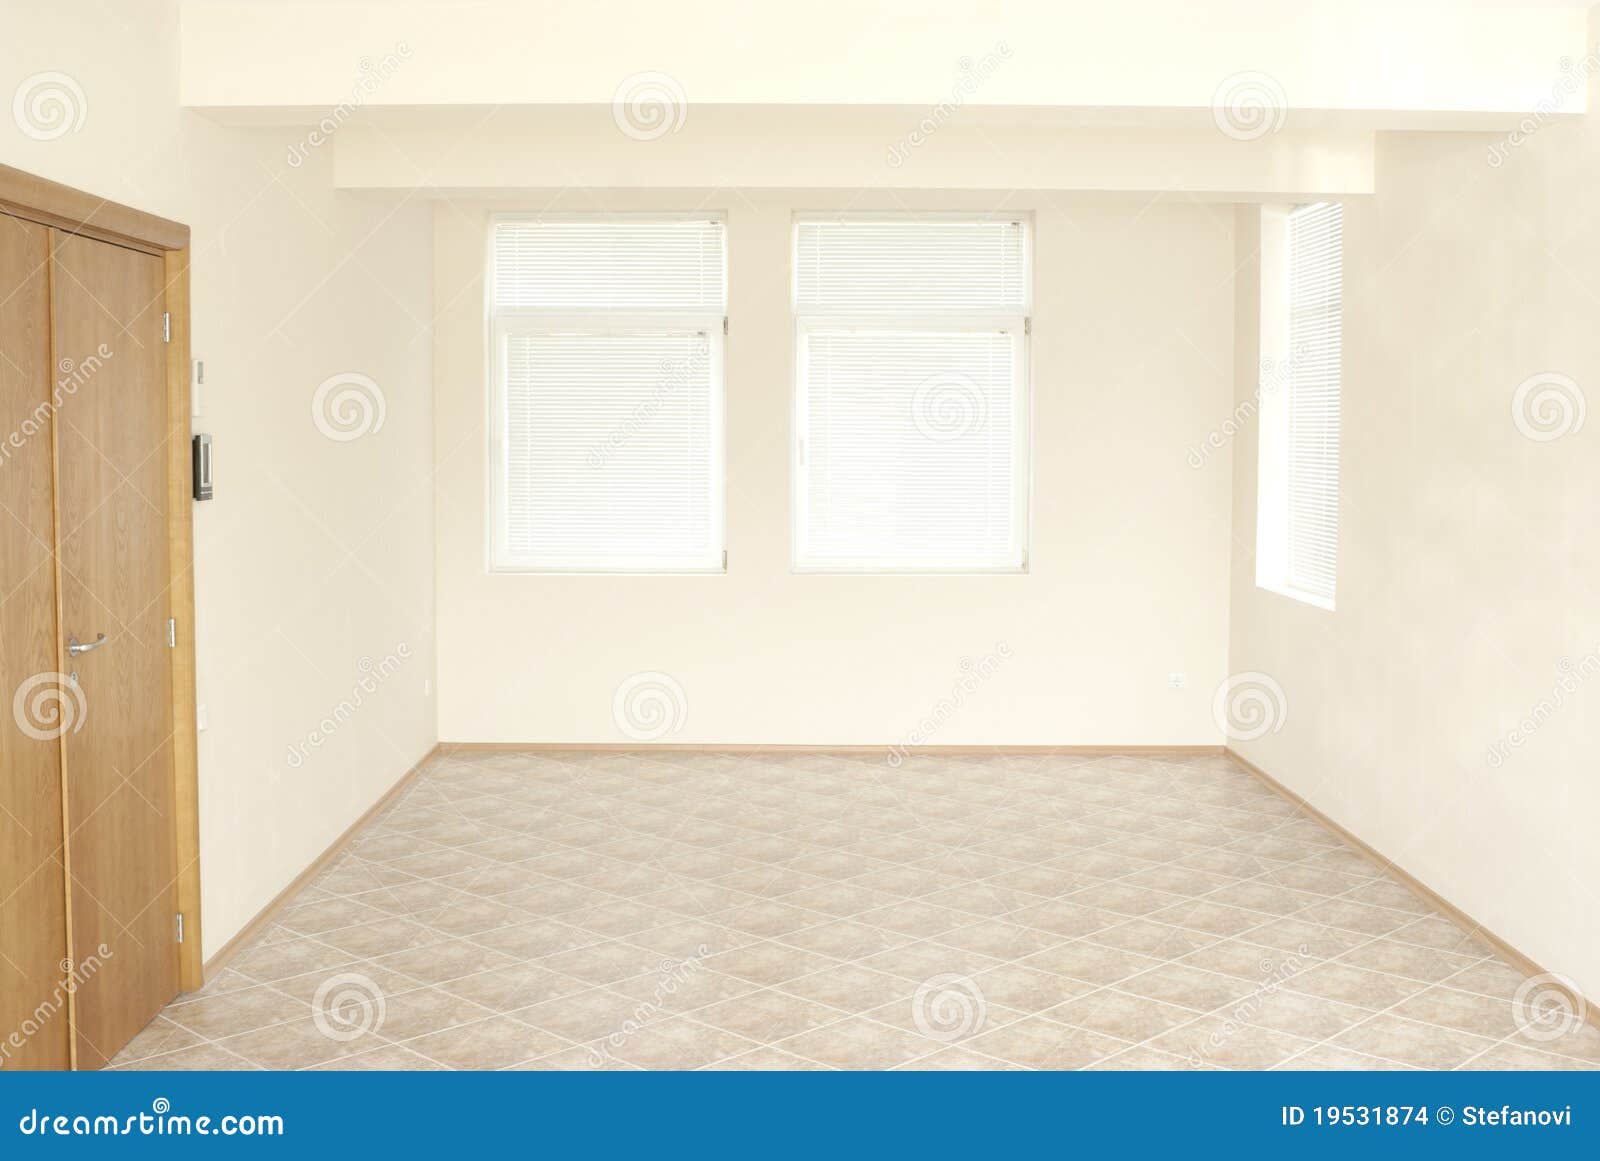 Empty office room with wooden door that can be used for background or 